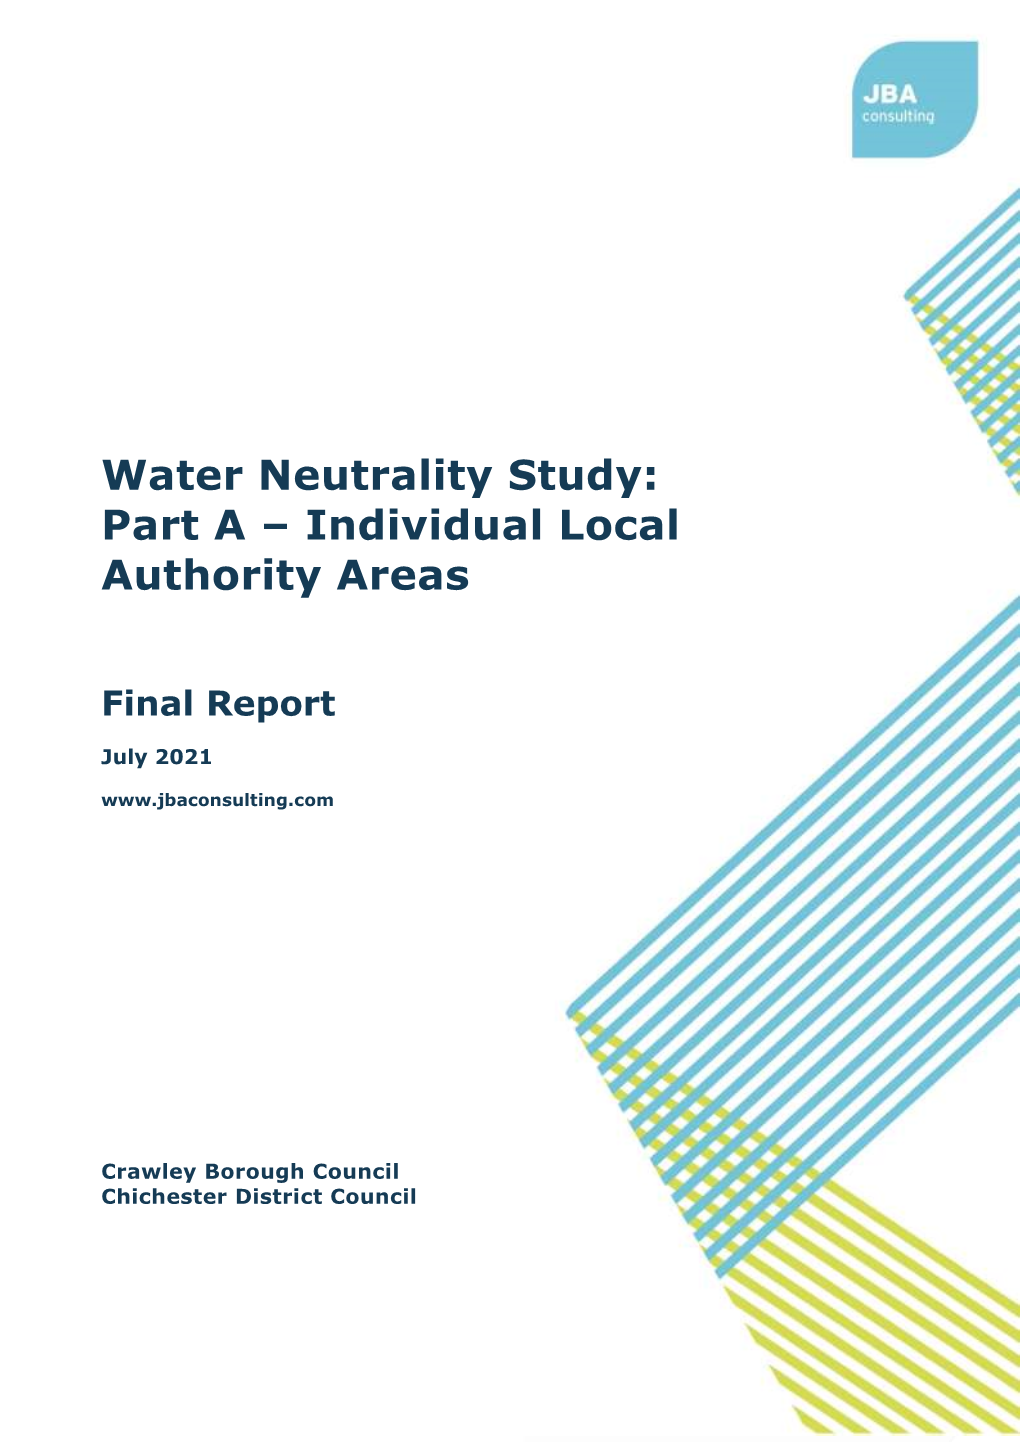 Water Neutrality Study: Part a – Individual Local Authority Areas